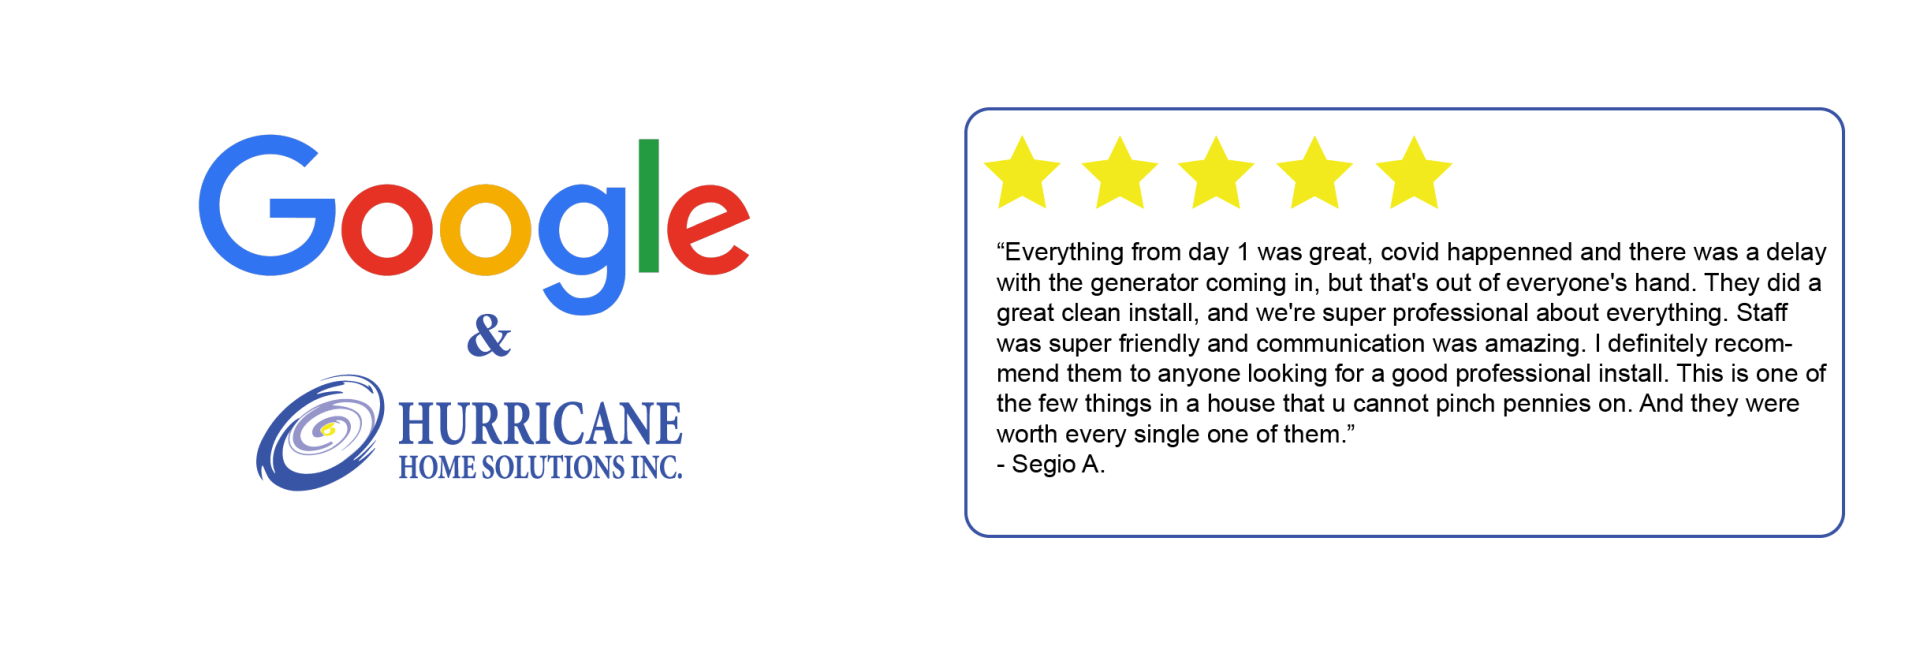 A 5-Star Review on Google for Hurricane Home Solutions